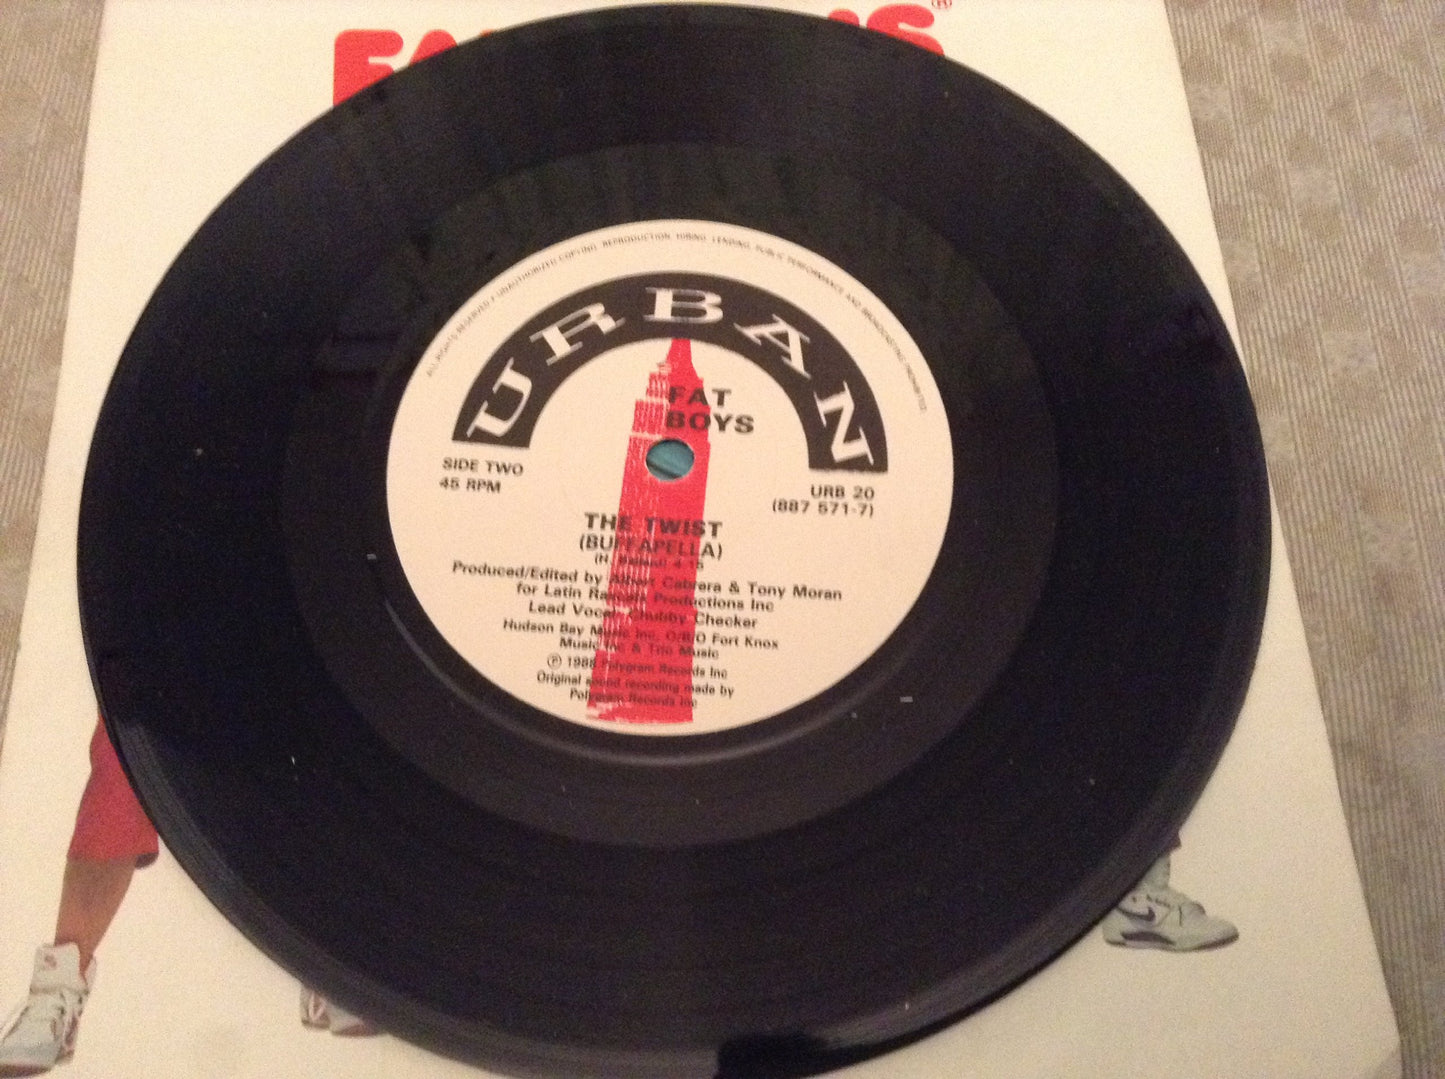 The Fat Boys With Chubby Checker A.Side The Twist, B.Side The Twist, Polygram Records Label 1988, 7 inch vinyl Single.